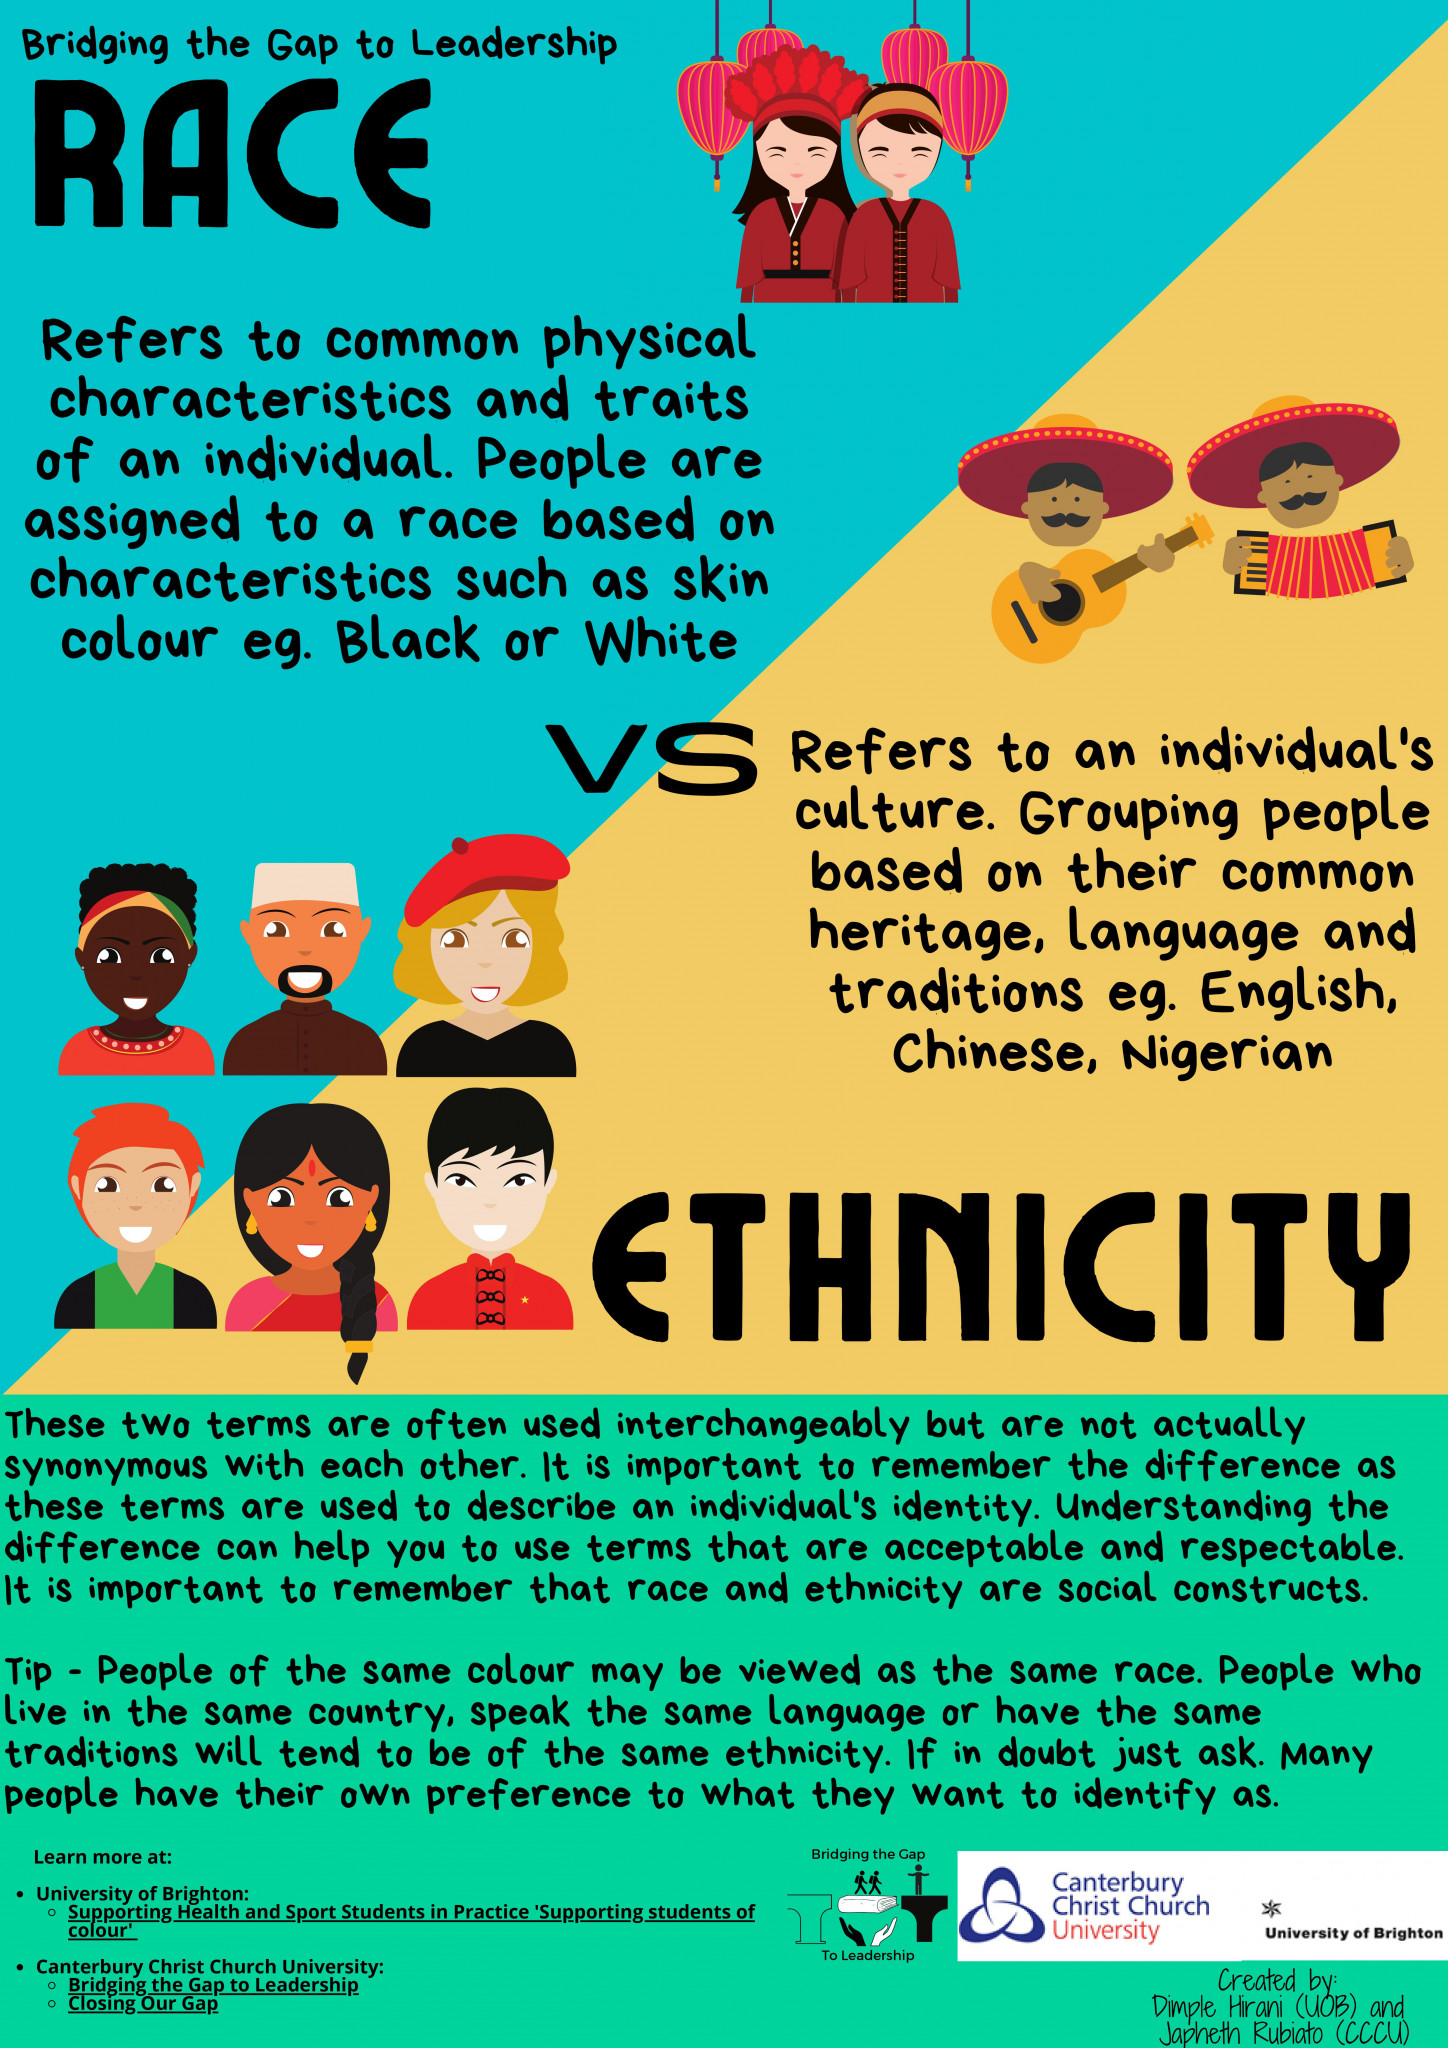 race-vs-ethnicity-a-guide-bridging-the-gap-to-leadership